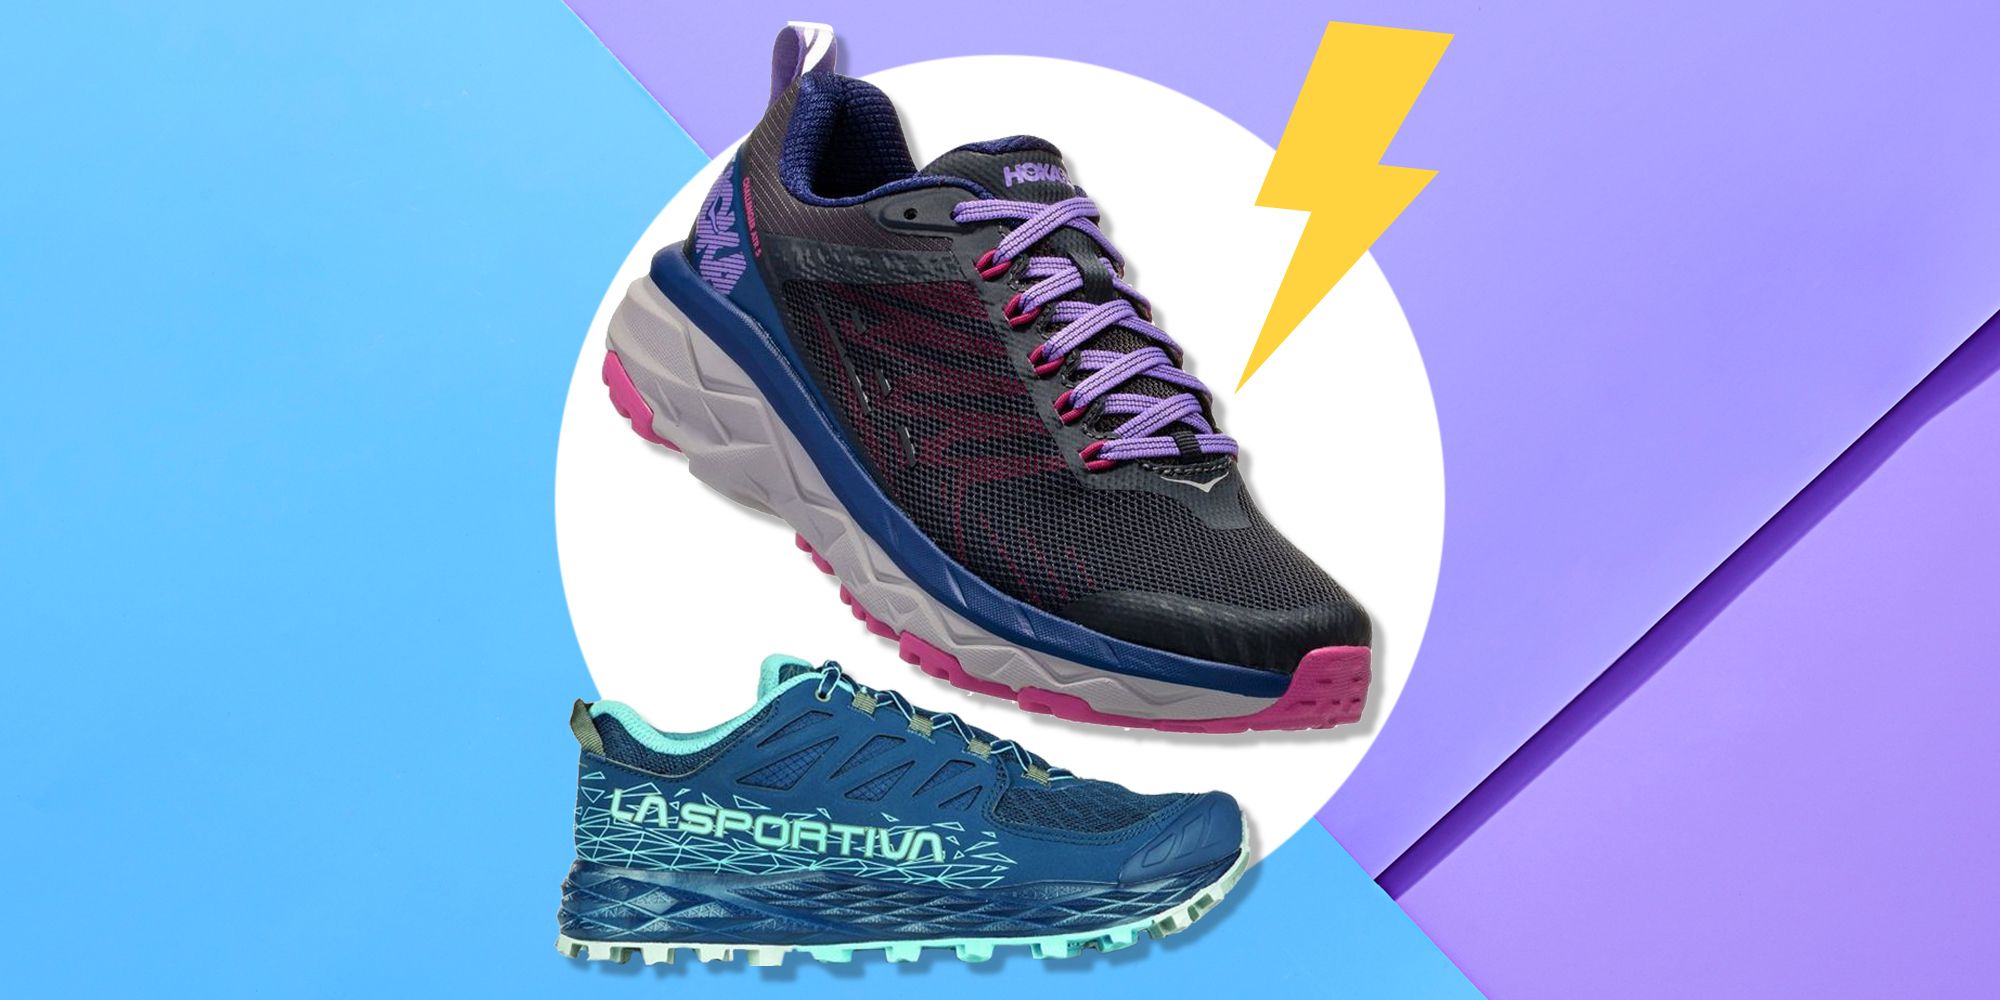 best women's running shoes for road and trail